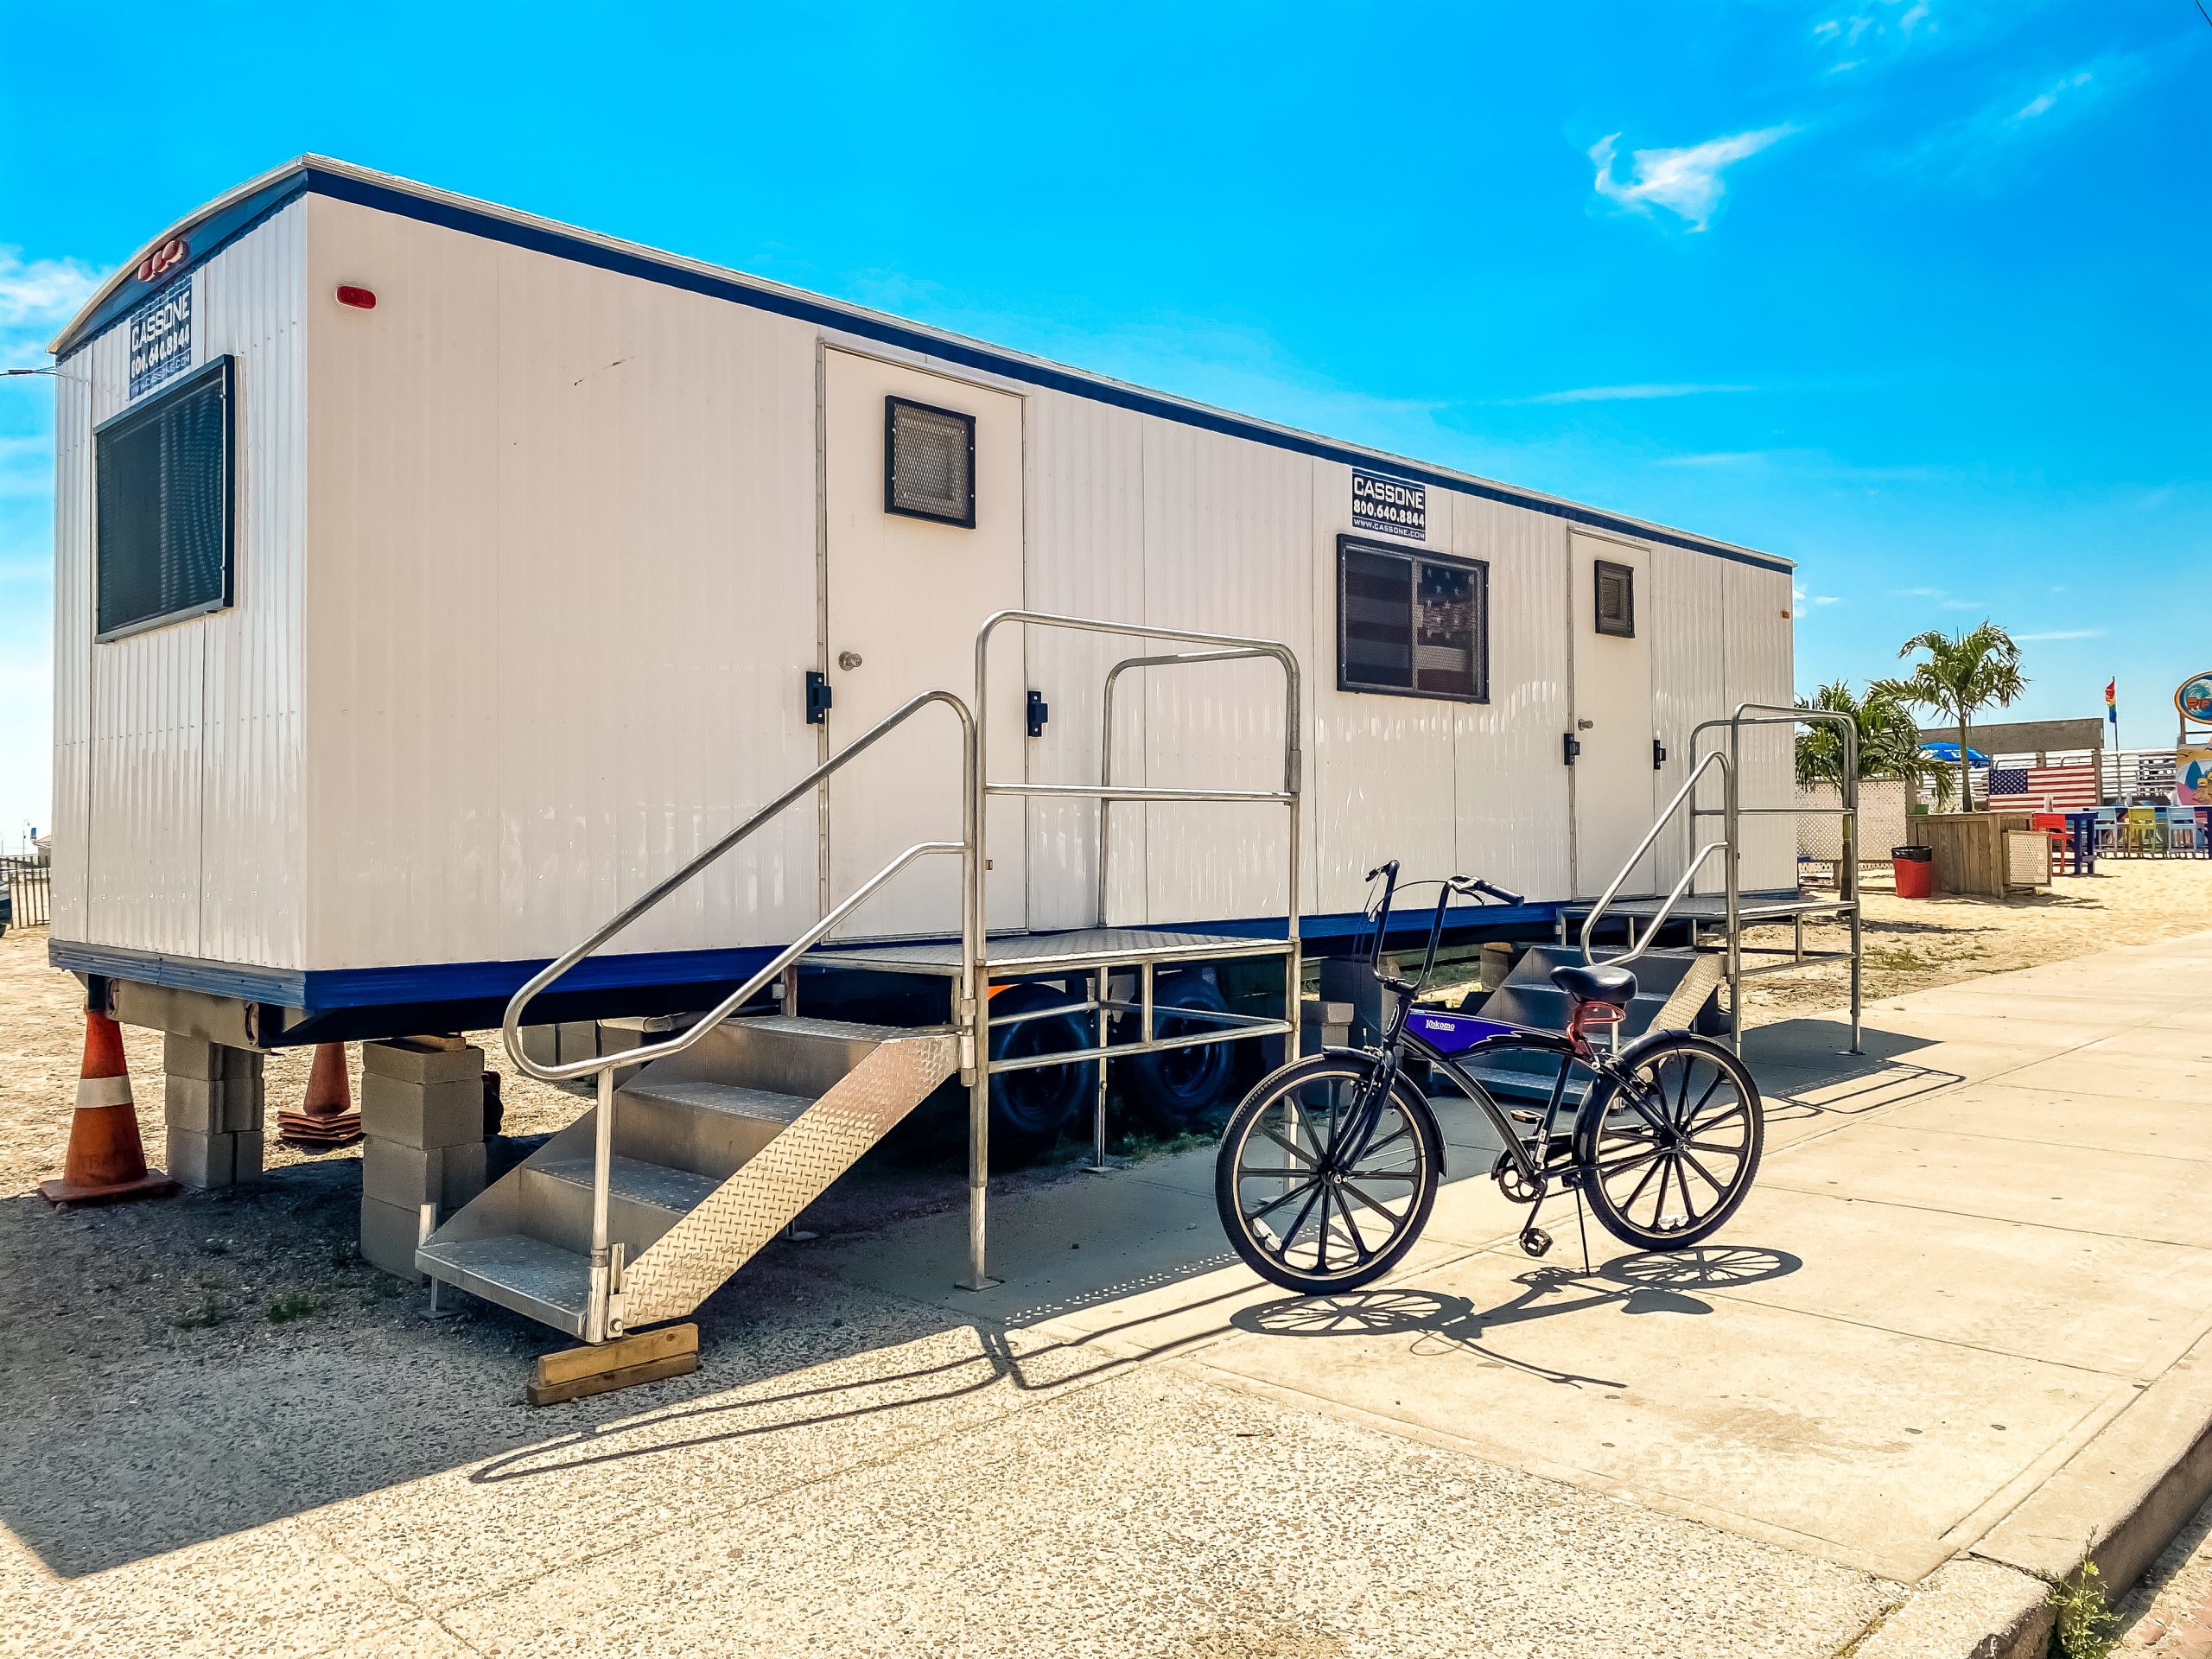 What You Should Know Before You Buy a Used Office Trailer